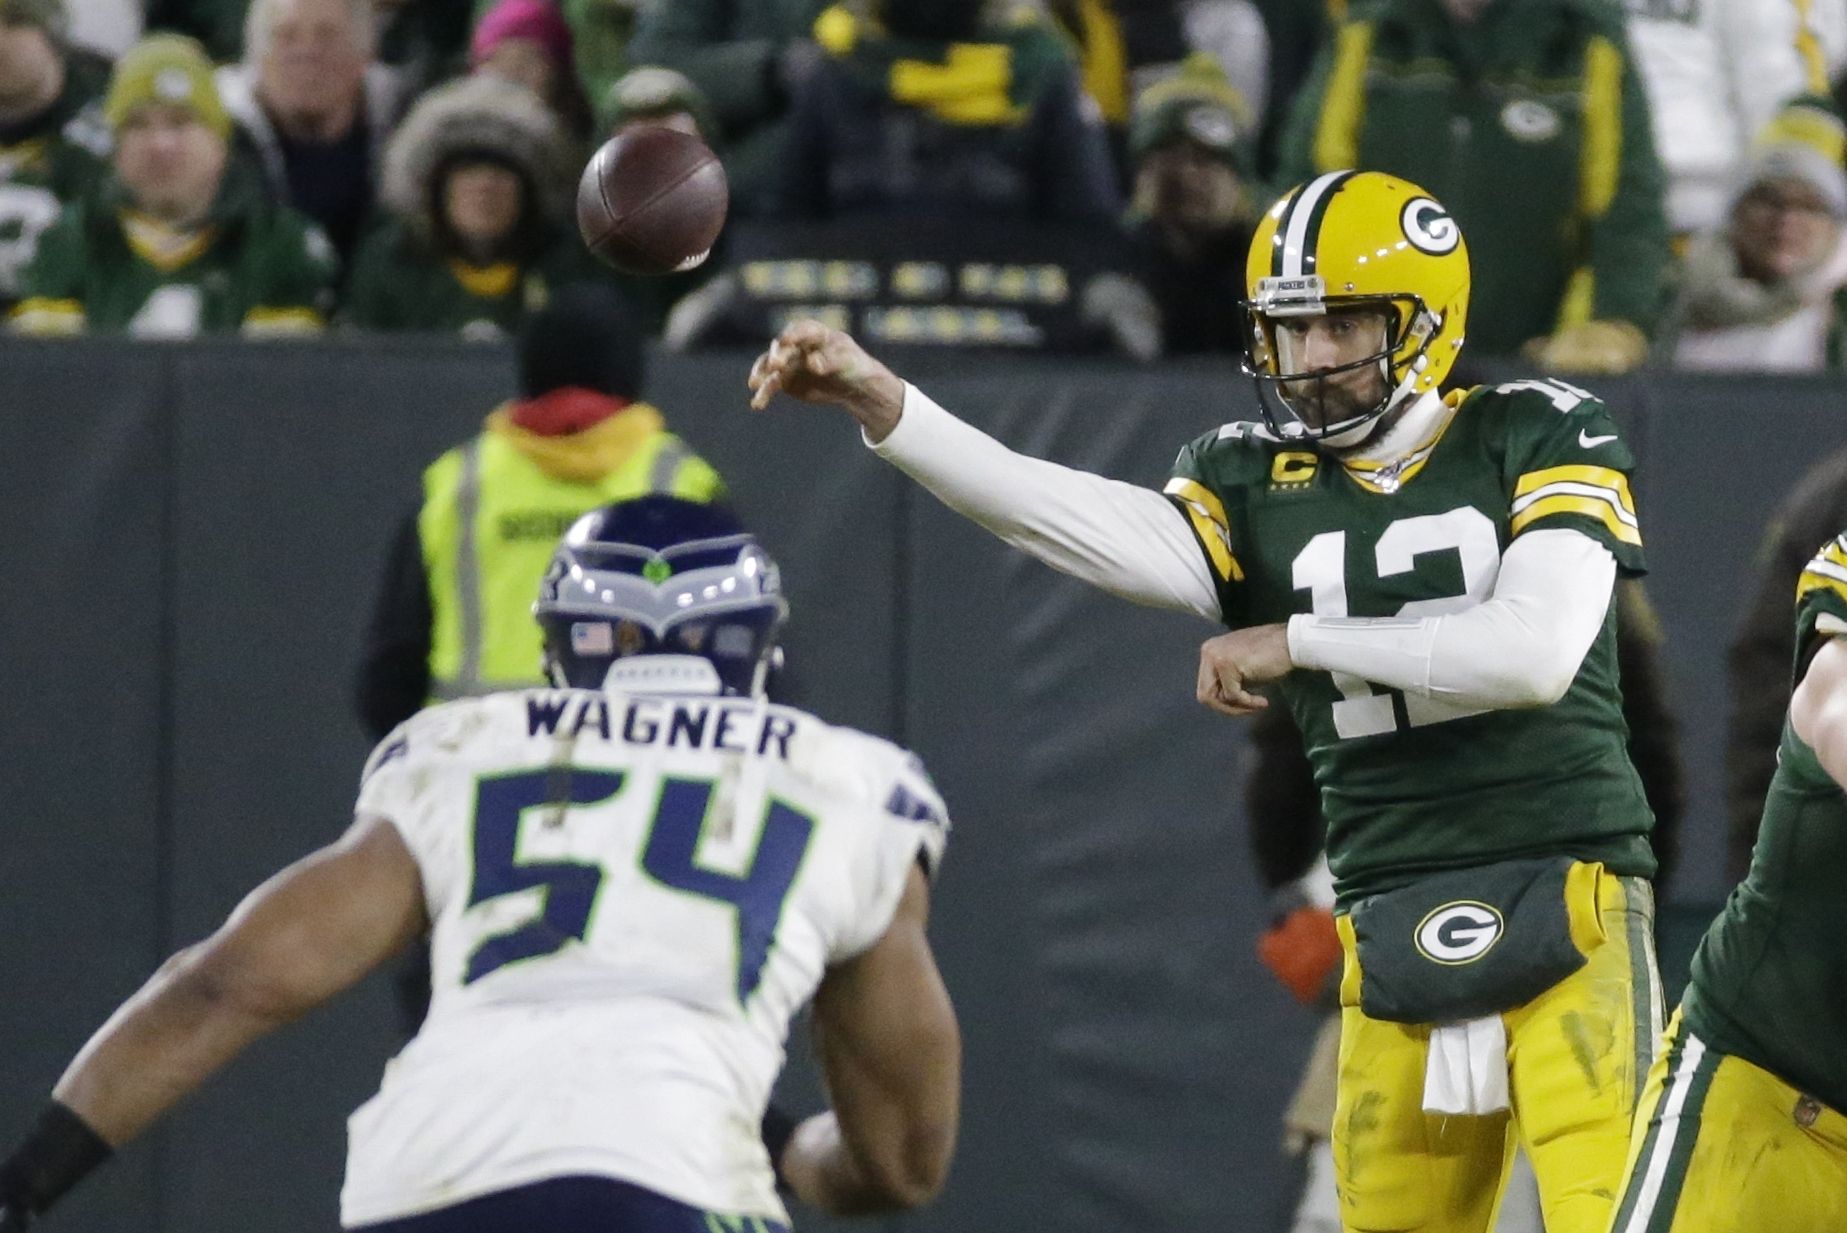 How to stream, watch Packers-49ers NFC Championship Game on TV